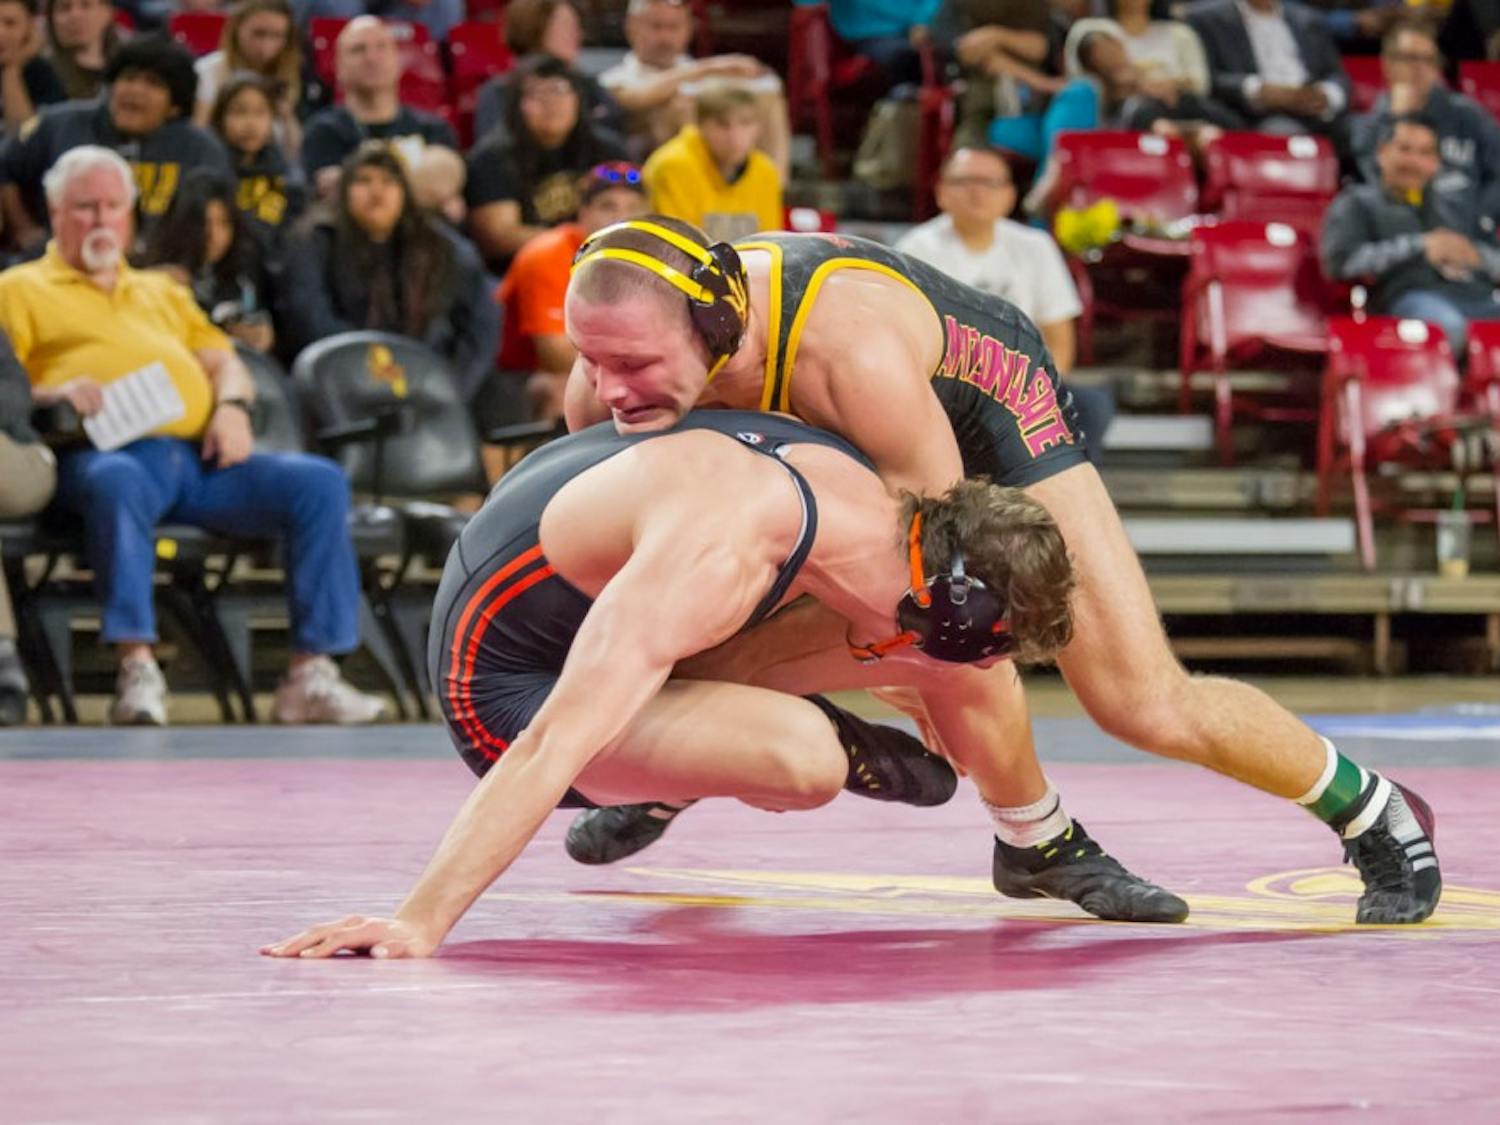 Redshirt senior Blake Stauffer takes down Oregon State's Corey Griego for two points on Friday, Jan. 29, 2016, at the Wells Fargo Arena in Tempe.